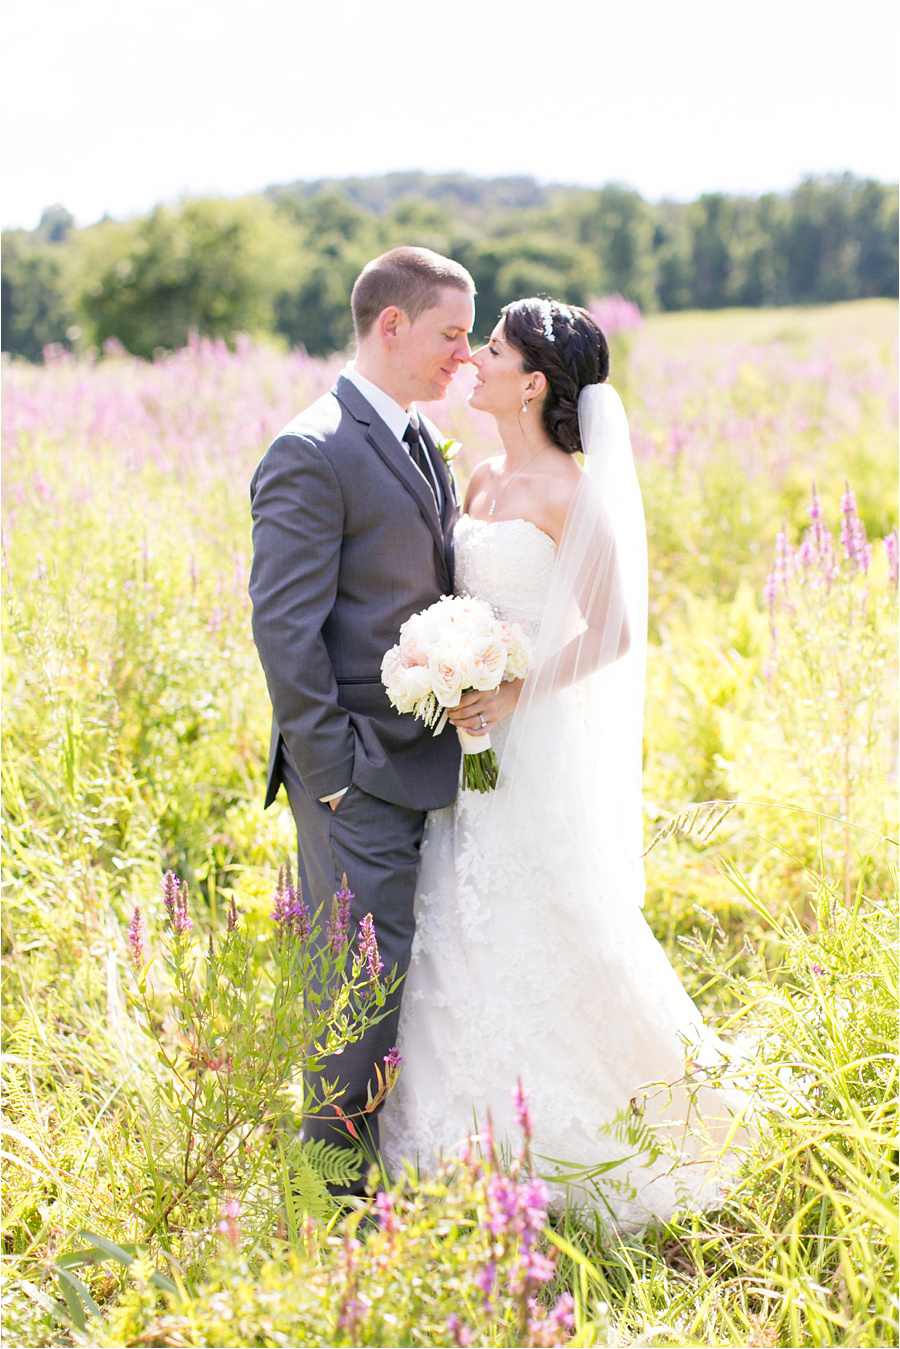 Red Maple Vineyard Wedding Photos - Amy Rizzuto Photography-26